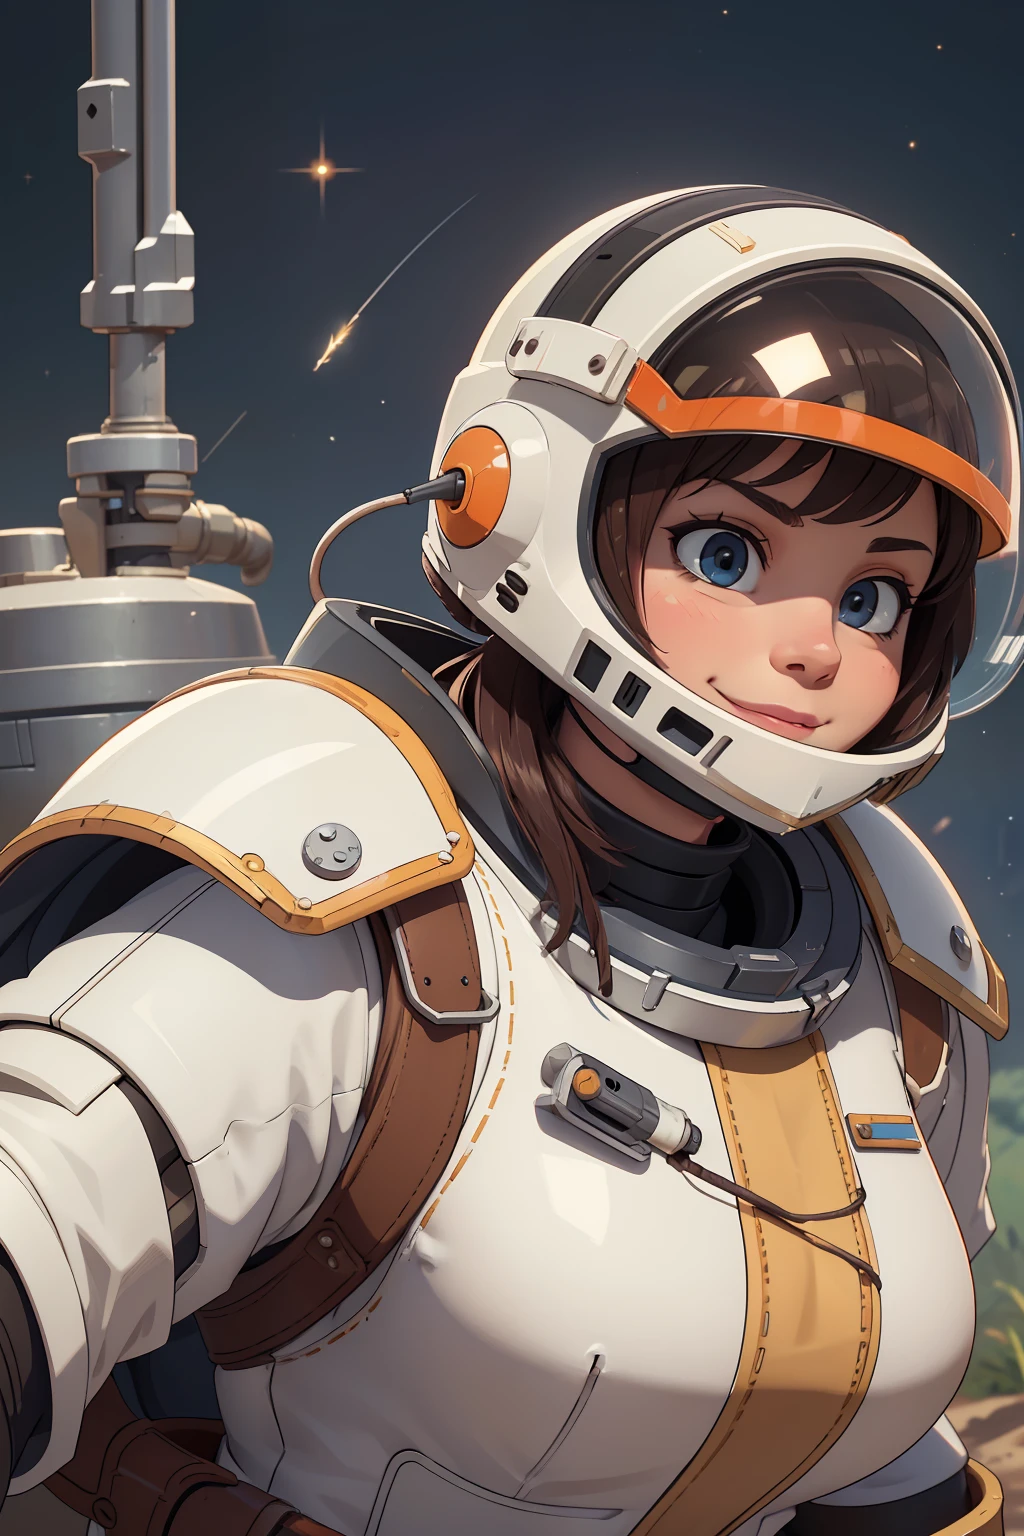 professional artwork, detailed eyes, beautiful eyes, thick thighs, breasts, beautiful face, flawless face, gorgeous face, smooth features, blush, short hair, beautifully detailed background, adventurous astronaut knight in bulky armored space suit, space suit looks like knight armor, space suit, thick heavy space suit, environment suit, hoses and tubes on suit, dials and switches, space suit backpack, nasa, nasa punk, nasapunk, astronaut, astronaut suit, cosmonaut, medieval knight, knight armor, leather armor and metal armor, mechanical background, sci fi, science fiction, futuristic, fantasy armor, full plate armor, medieval armor, knight helmet, knight visor, grilled faceplate, large helmet, big helmet, heavy collar, vacuum seal ring around neck, life support systems, rustic material, heavy stitching, thick leathers, armored breastplate, armored chest, leather gloves, rustic craftsmanship, adventurous, adventure, cute, smiling, shoulder pads, armor, white and orange outfit, heraldry, helmet on head, cassette futurism, gloved hands, bulky space suit, bulky suit, tubes and hoses, valves, mechanical, sword and shield, neon light, neon glow, neon, cuirass, pauldrons, chest armor, heavy metal chest armor, beam sword, plasma sword, light saber, knight, dome helmet